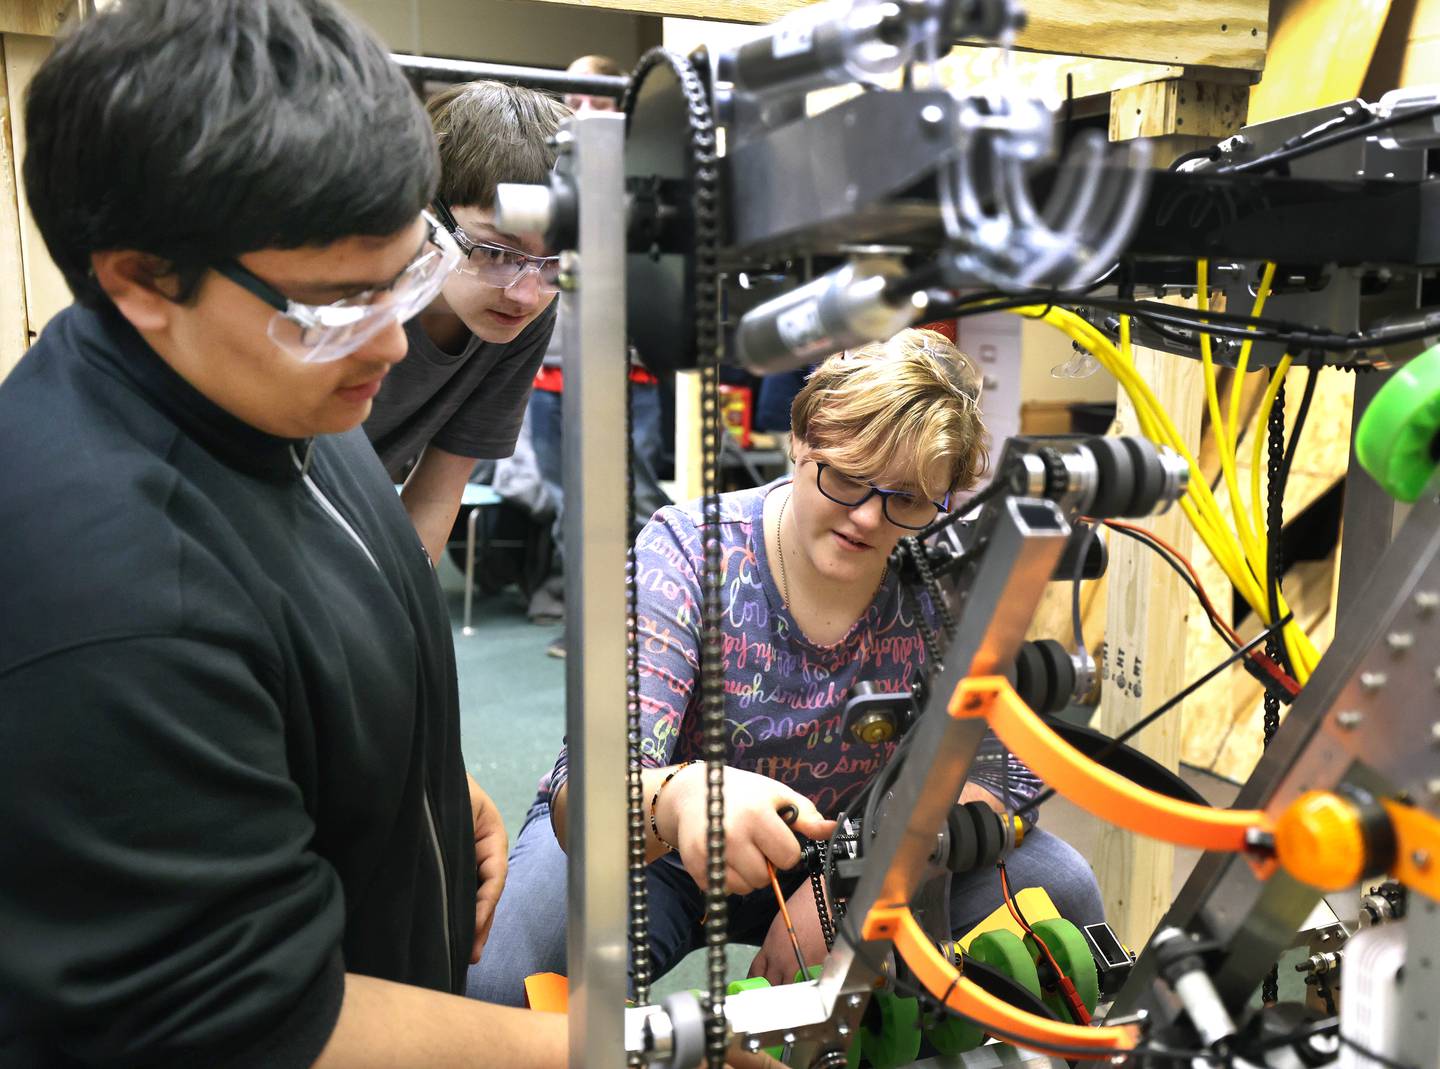 Members of the DeKalb High School "Crowbotics" team, freshman Lawrence Zanazaro, (left) freshman Blake Bollow and  freshman Felicia Kapity work on their robot Thursday, March 10, 2022, at Huntley Middle School in DeKalb. The team is preparing for a competition that begins in early April.